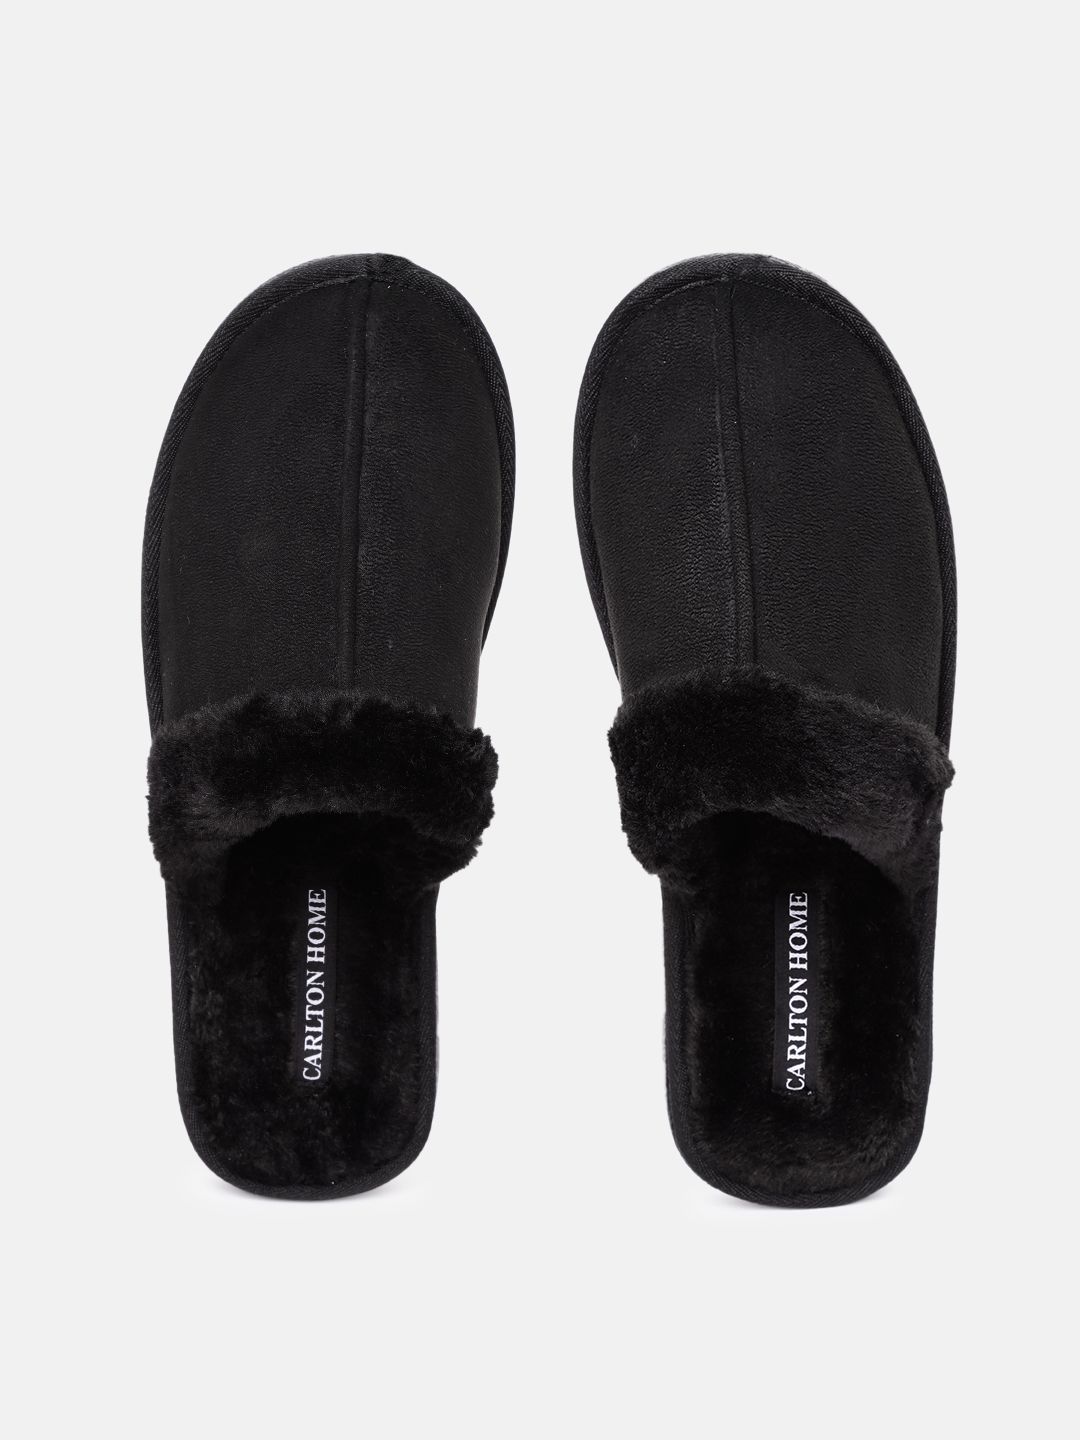 Carlton London Women Black Solid Room Slippers Price in India